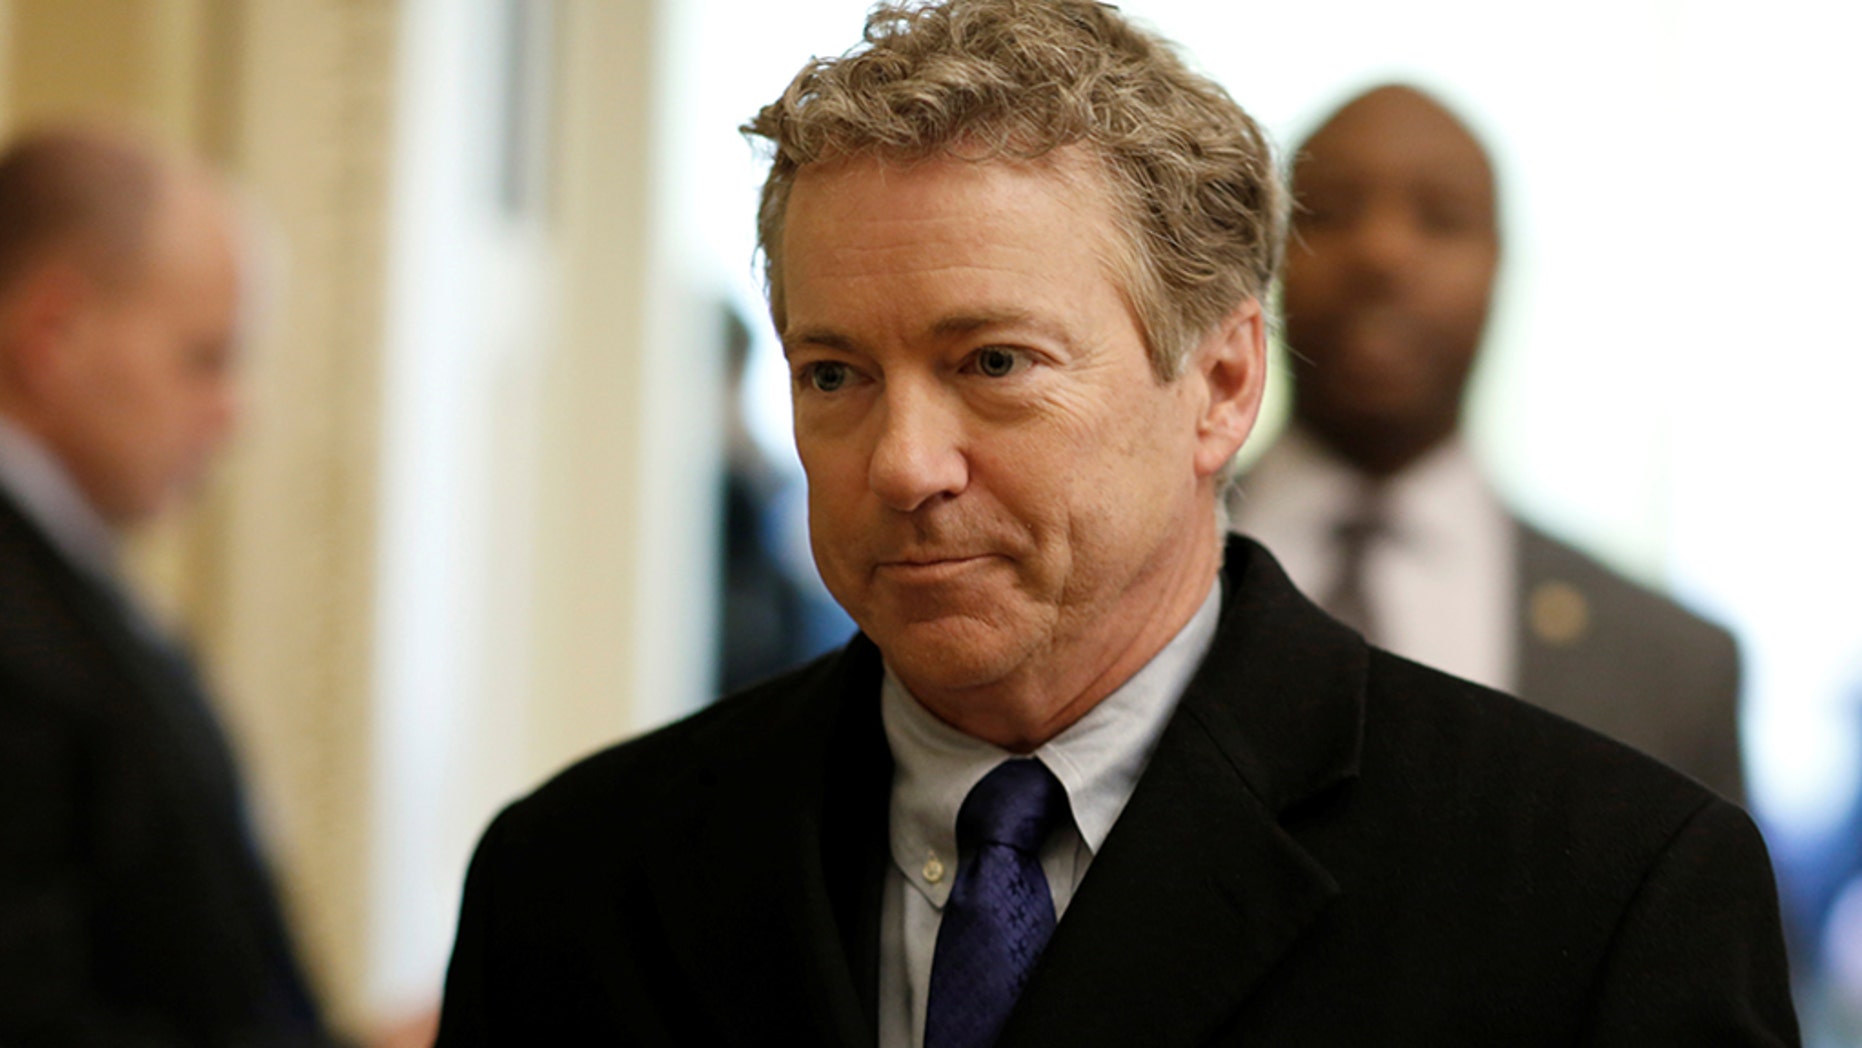 Sen. Rand Paul awarded over $580G after he was attacked by neighbor